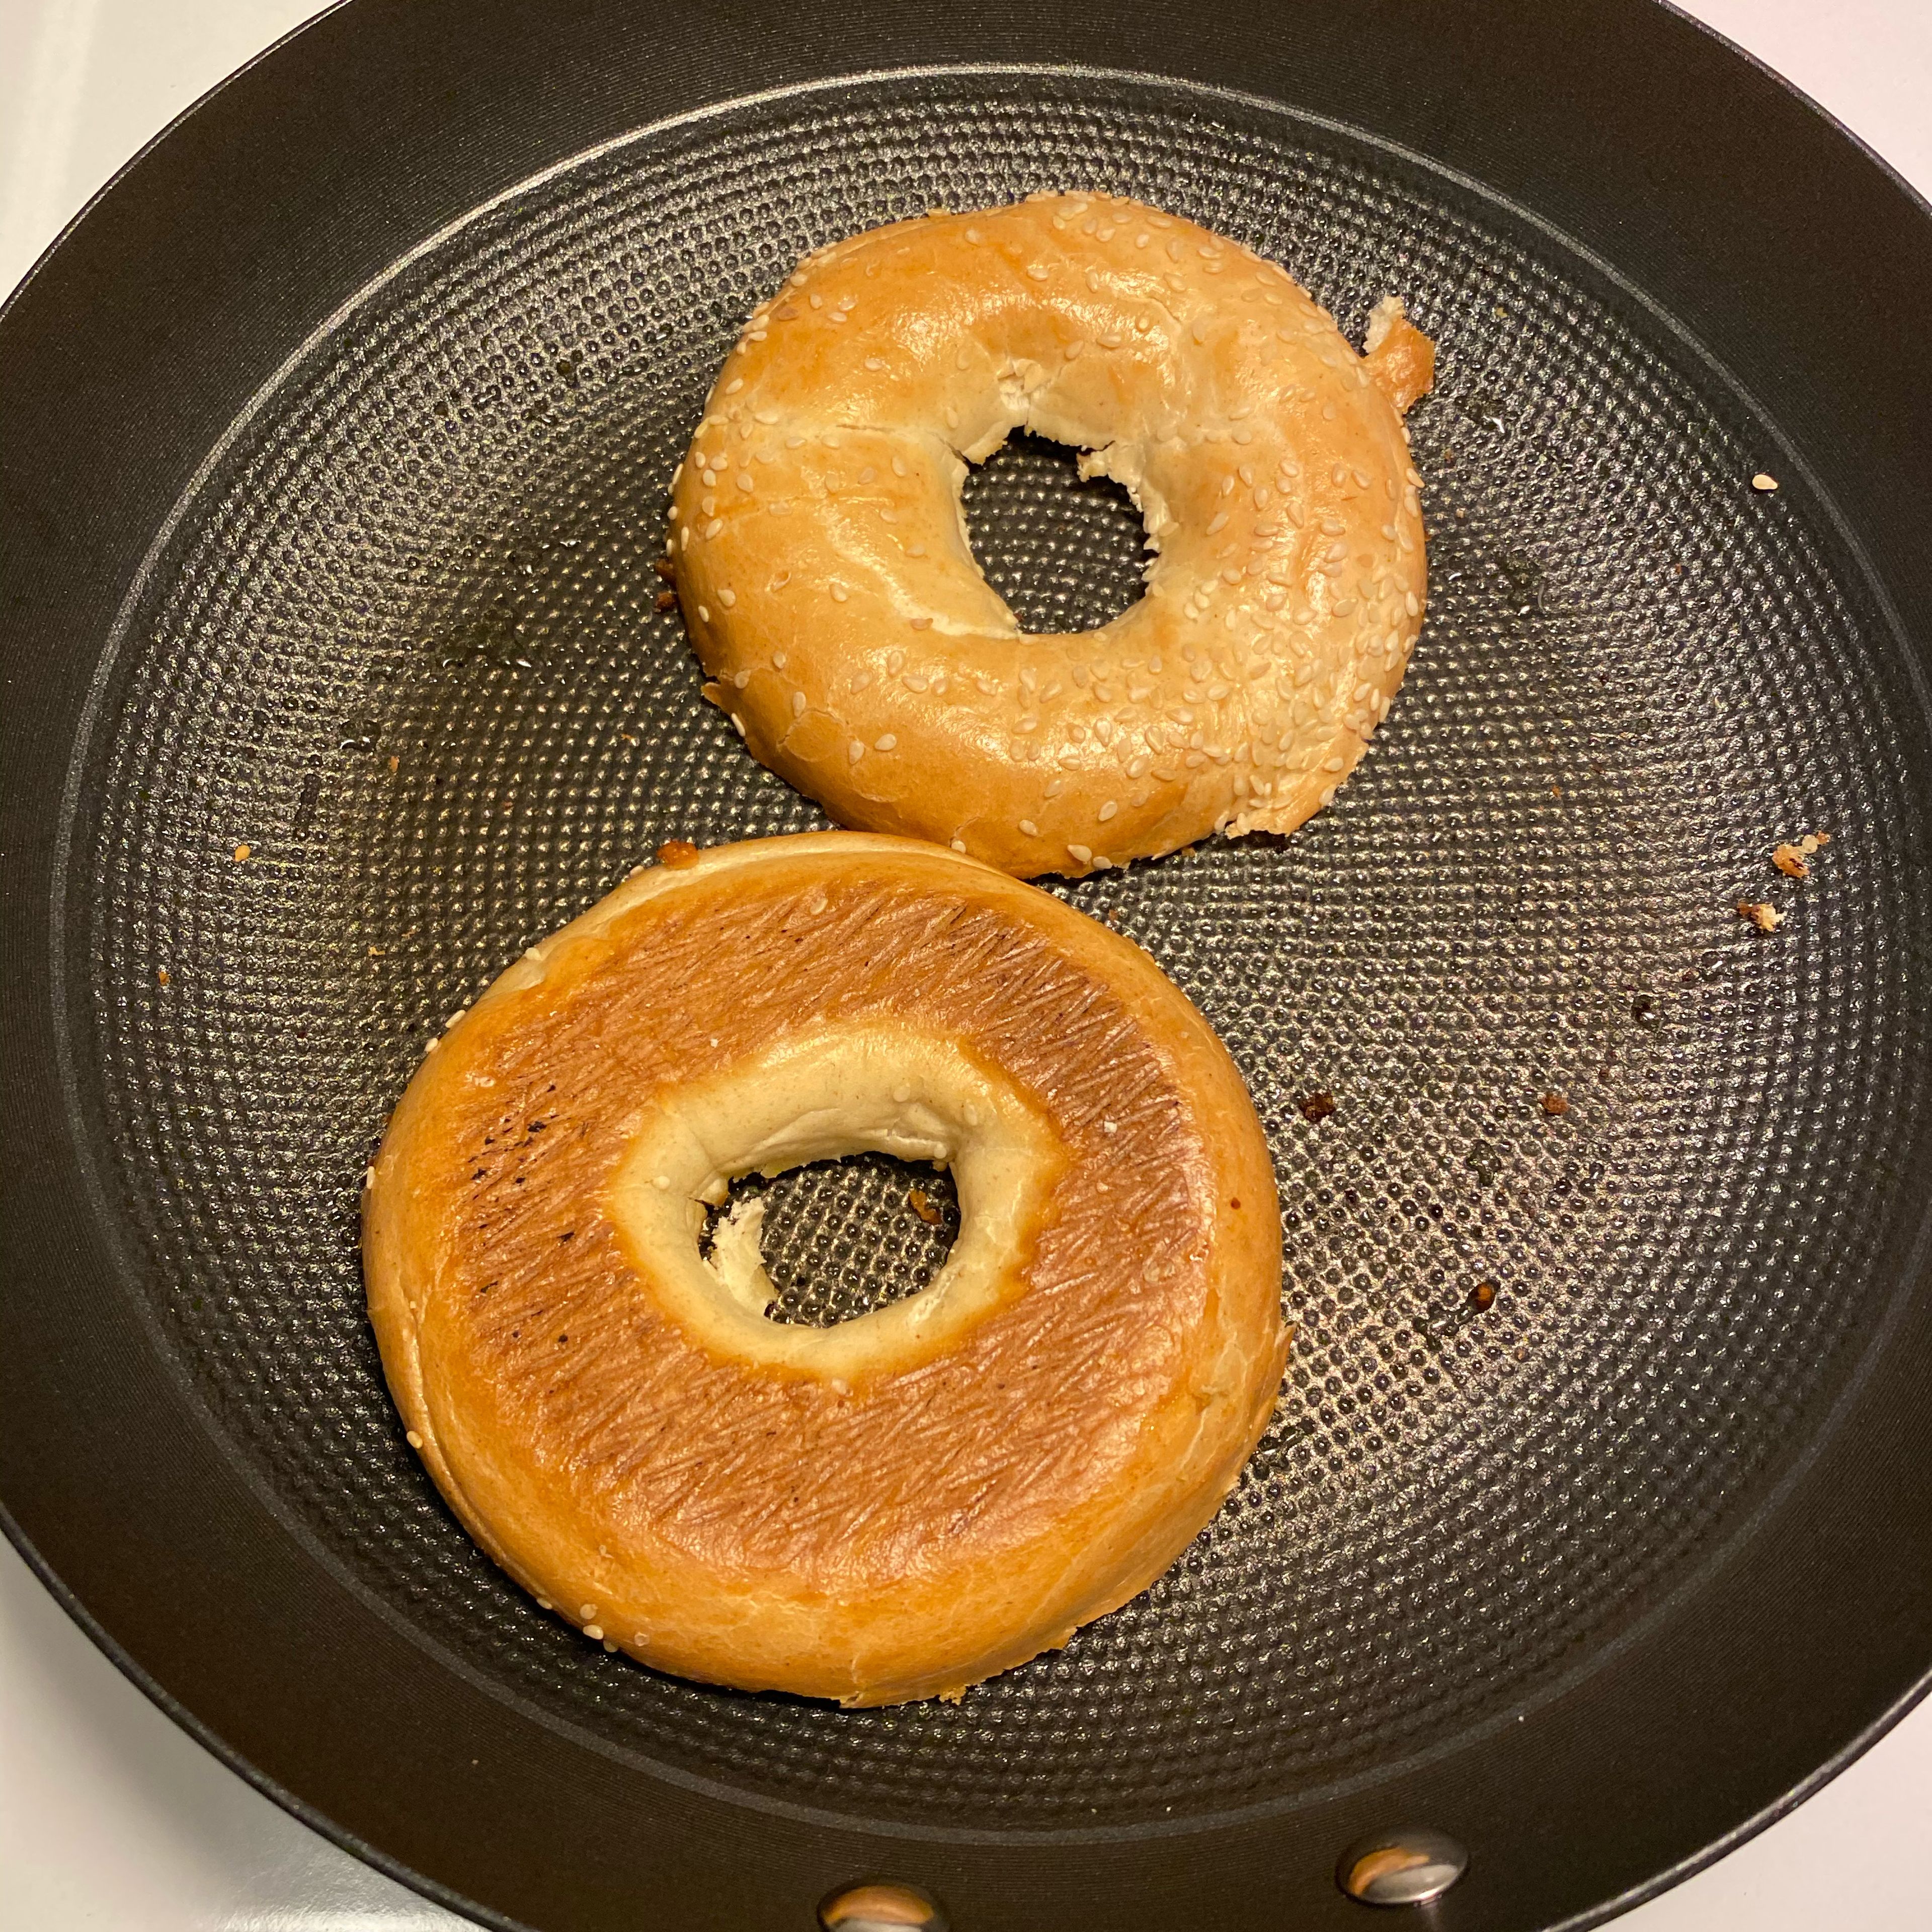 Slice the bagel into half and put oil in a pan and toast it a little bit.